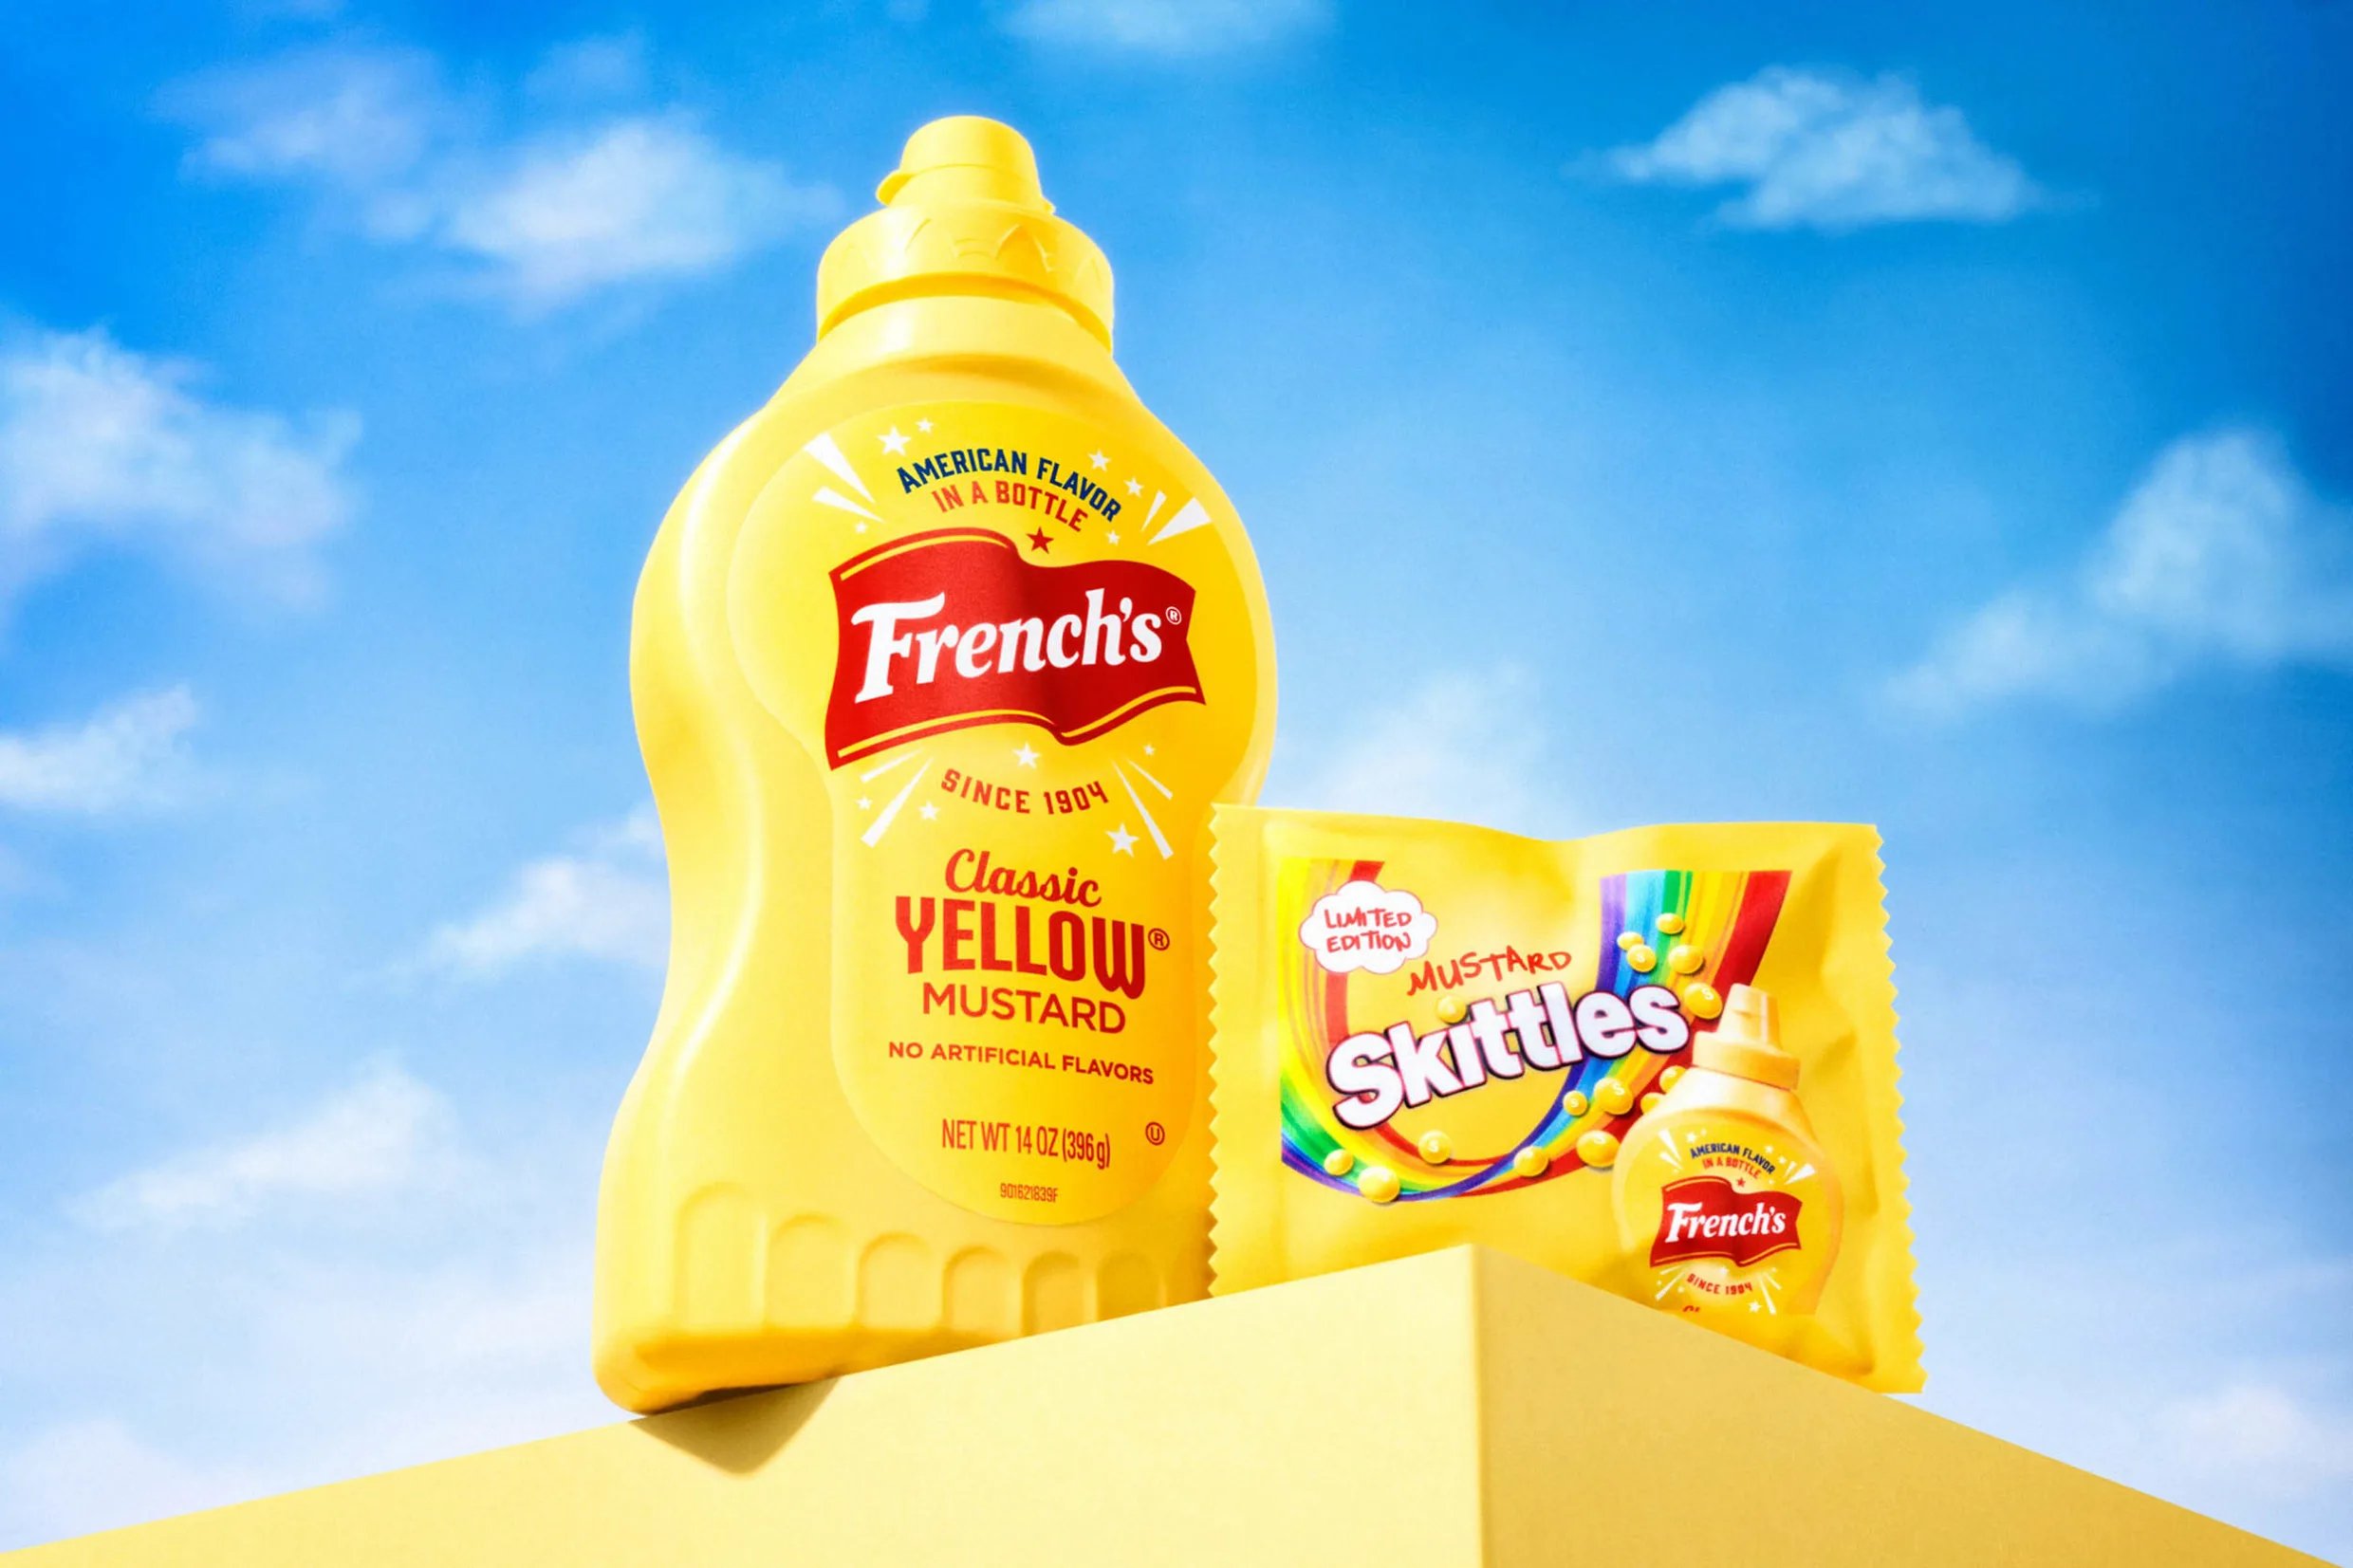 French's Mustard Skittles was not on our 2023 bingo card, but here we
are